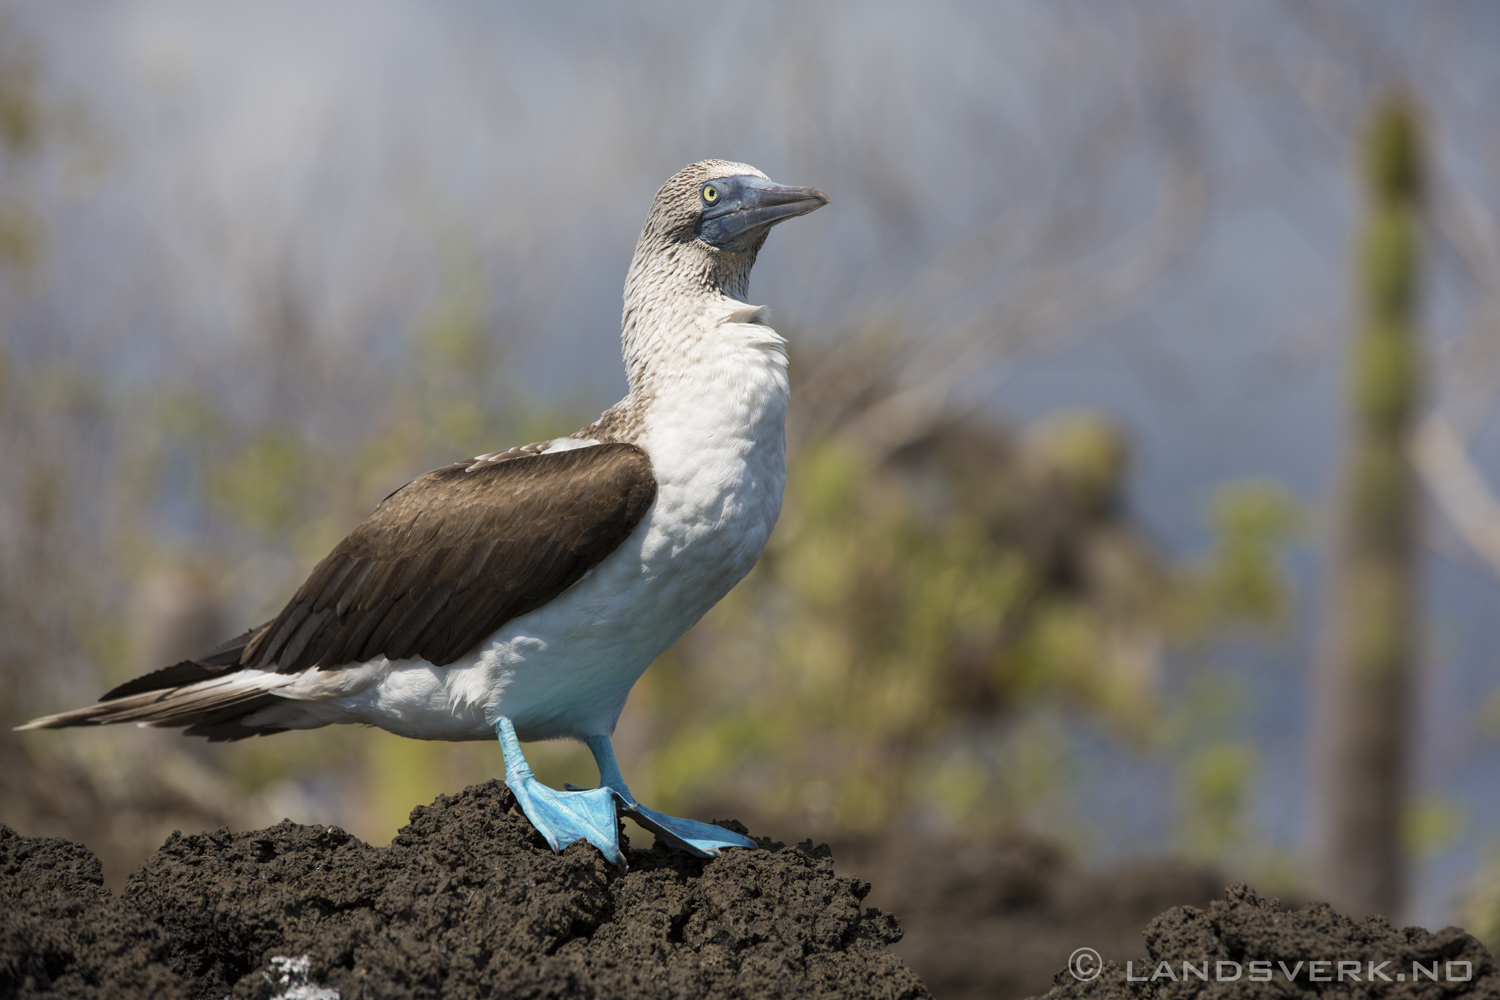 Wild Blue Footed Booby, Eden, Galapagos. 

(Canon EOS 5D Mark III / Canon EF 70-200mm f/2.8 L IS II USM)